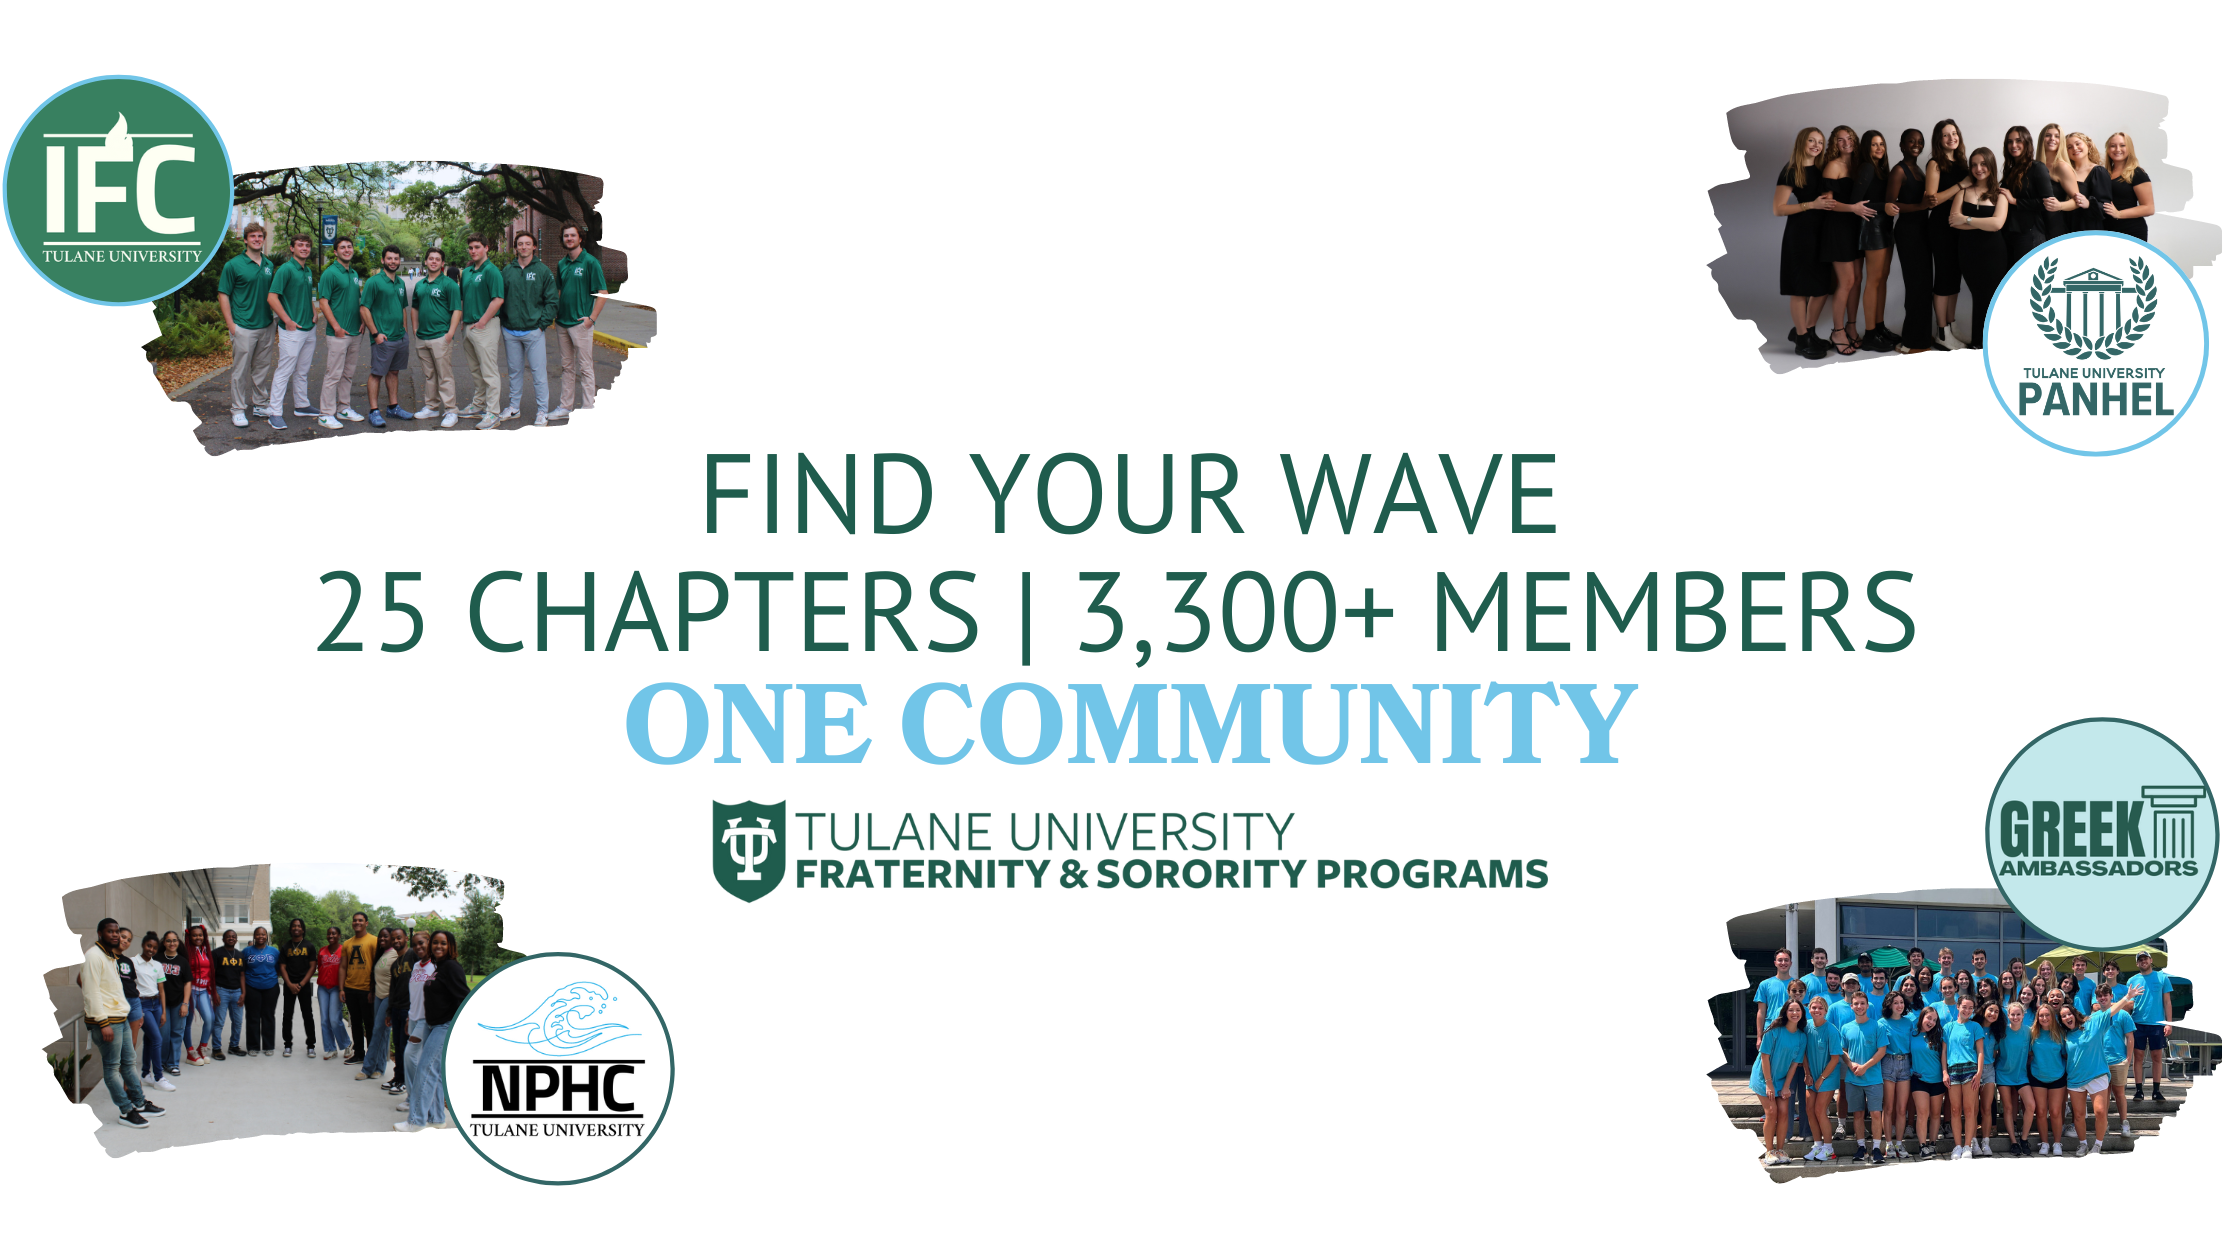 Find Your Wave w/ 25 Chapters | 3,300+ Members equaling One Community